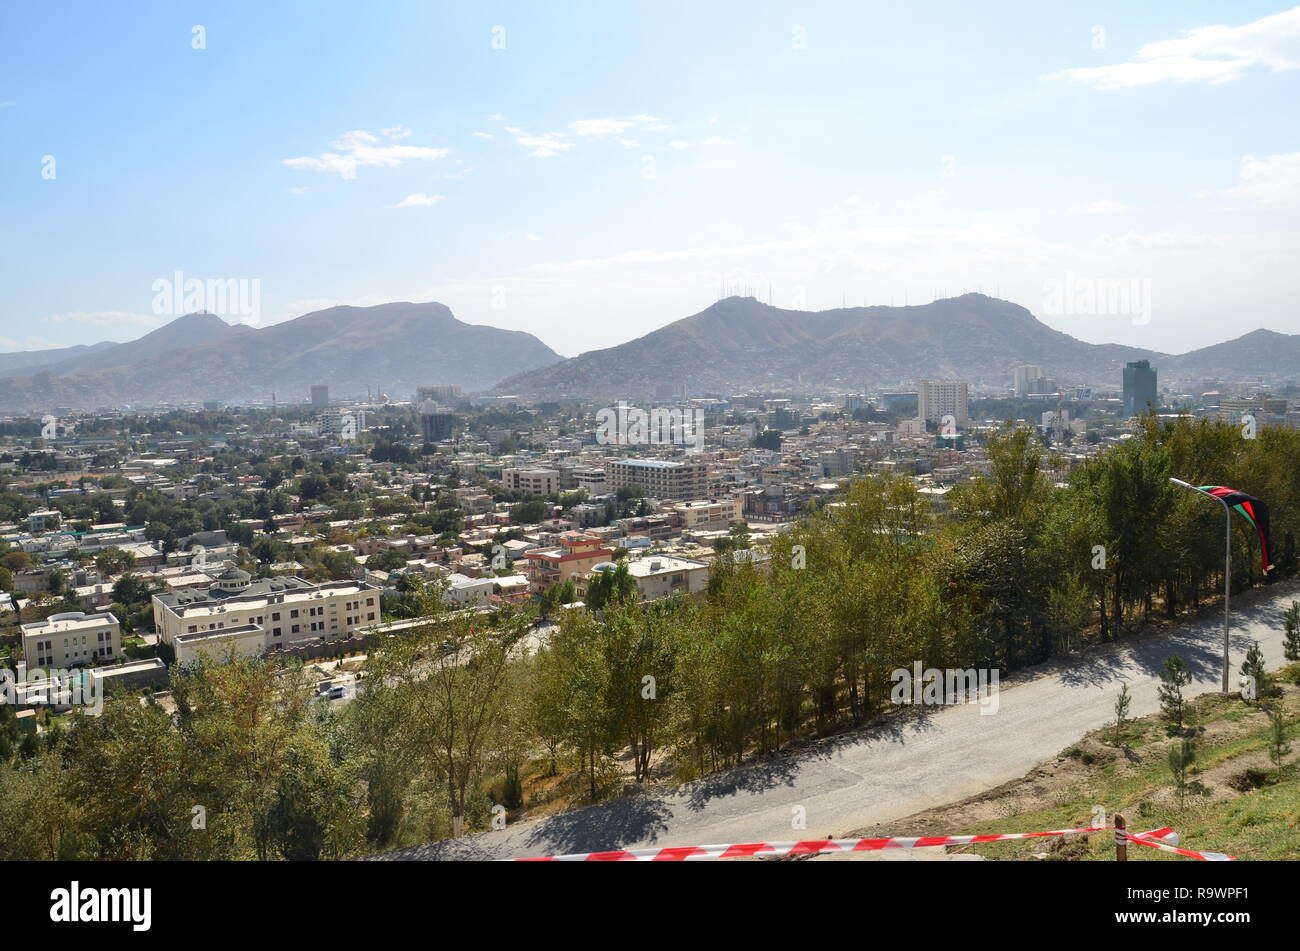 A view of Kabul city, Afghanistan. Stock Photo